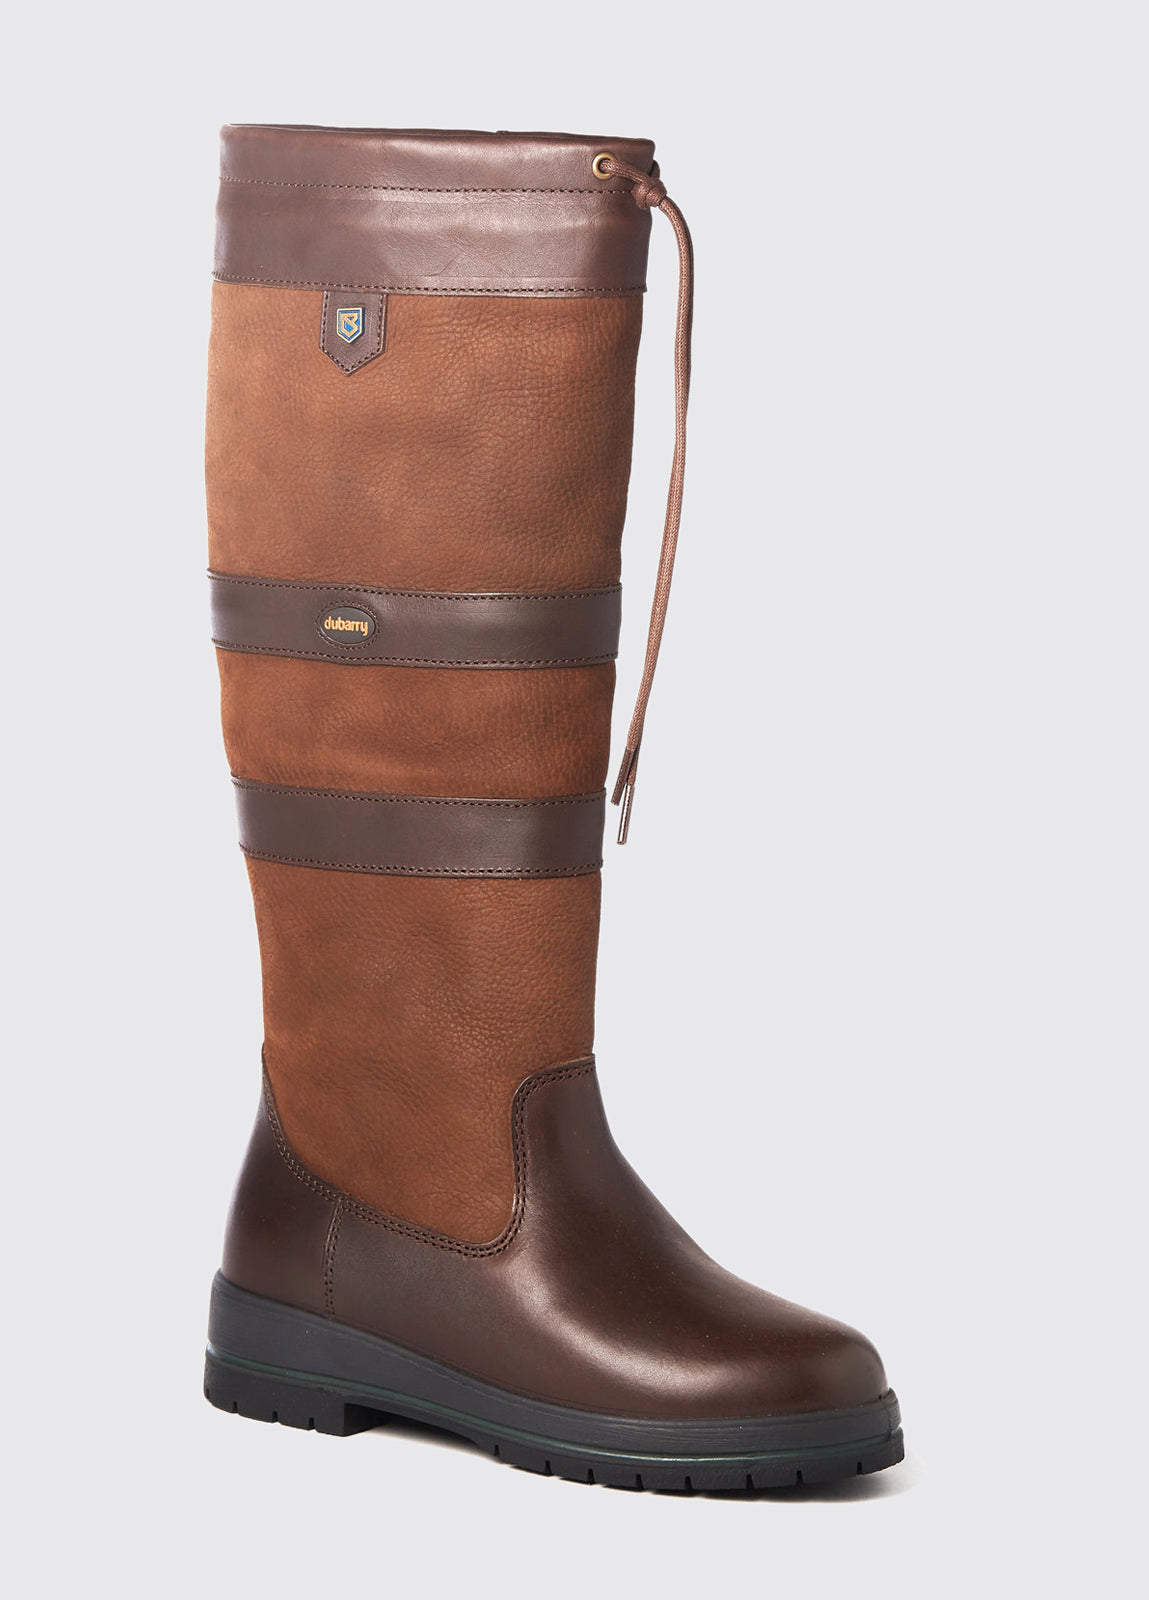 Dubarry Womens Galway Extrafit Country Boot - Walnut